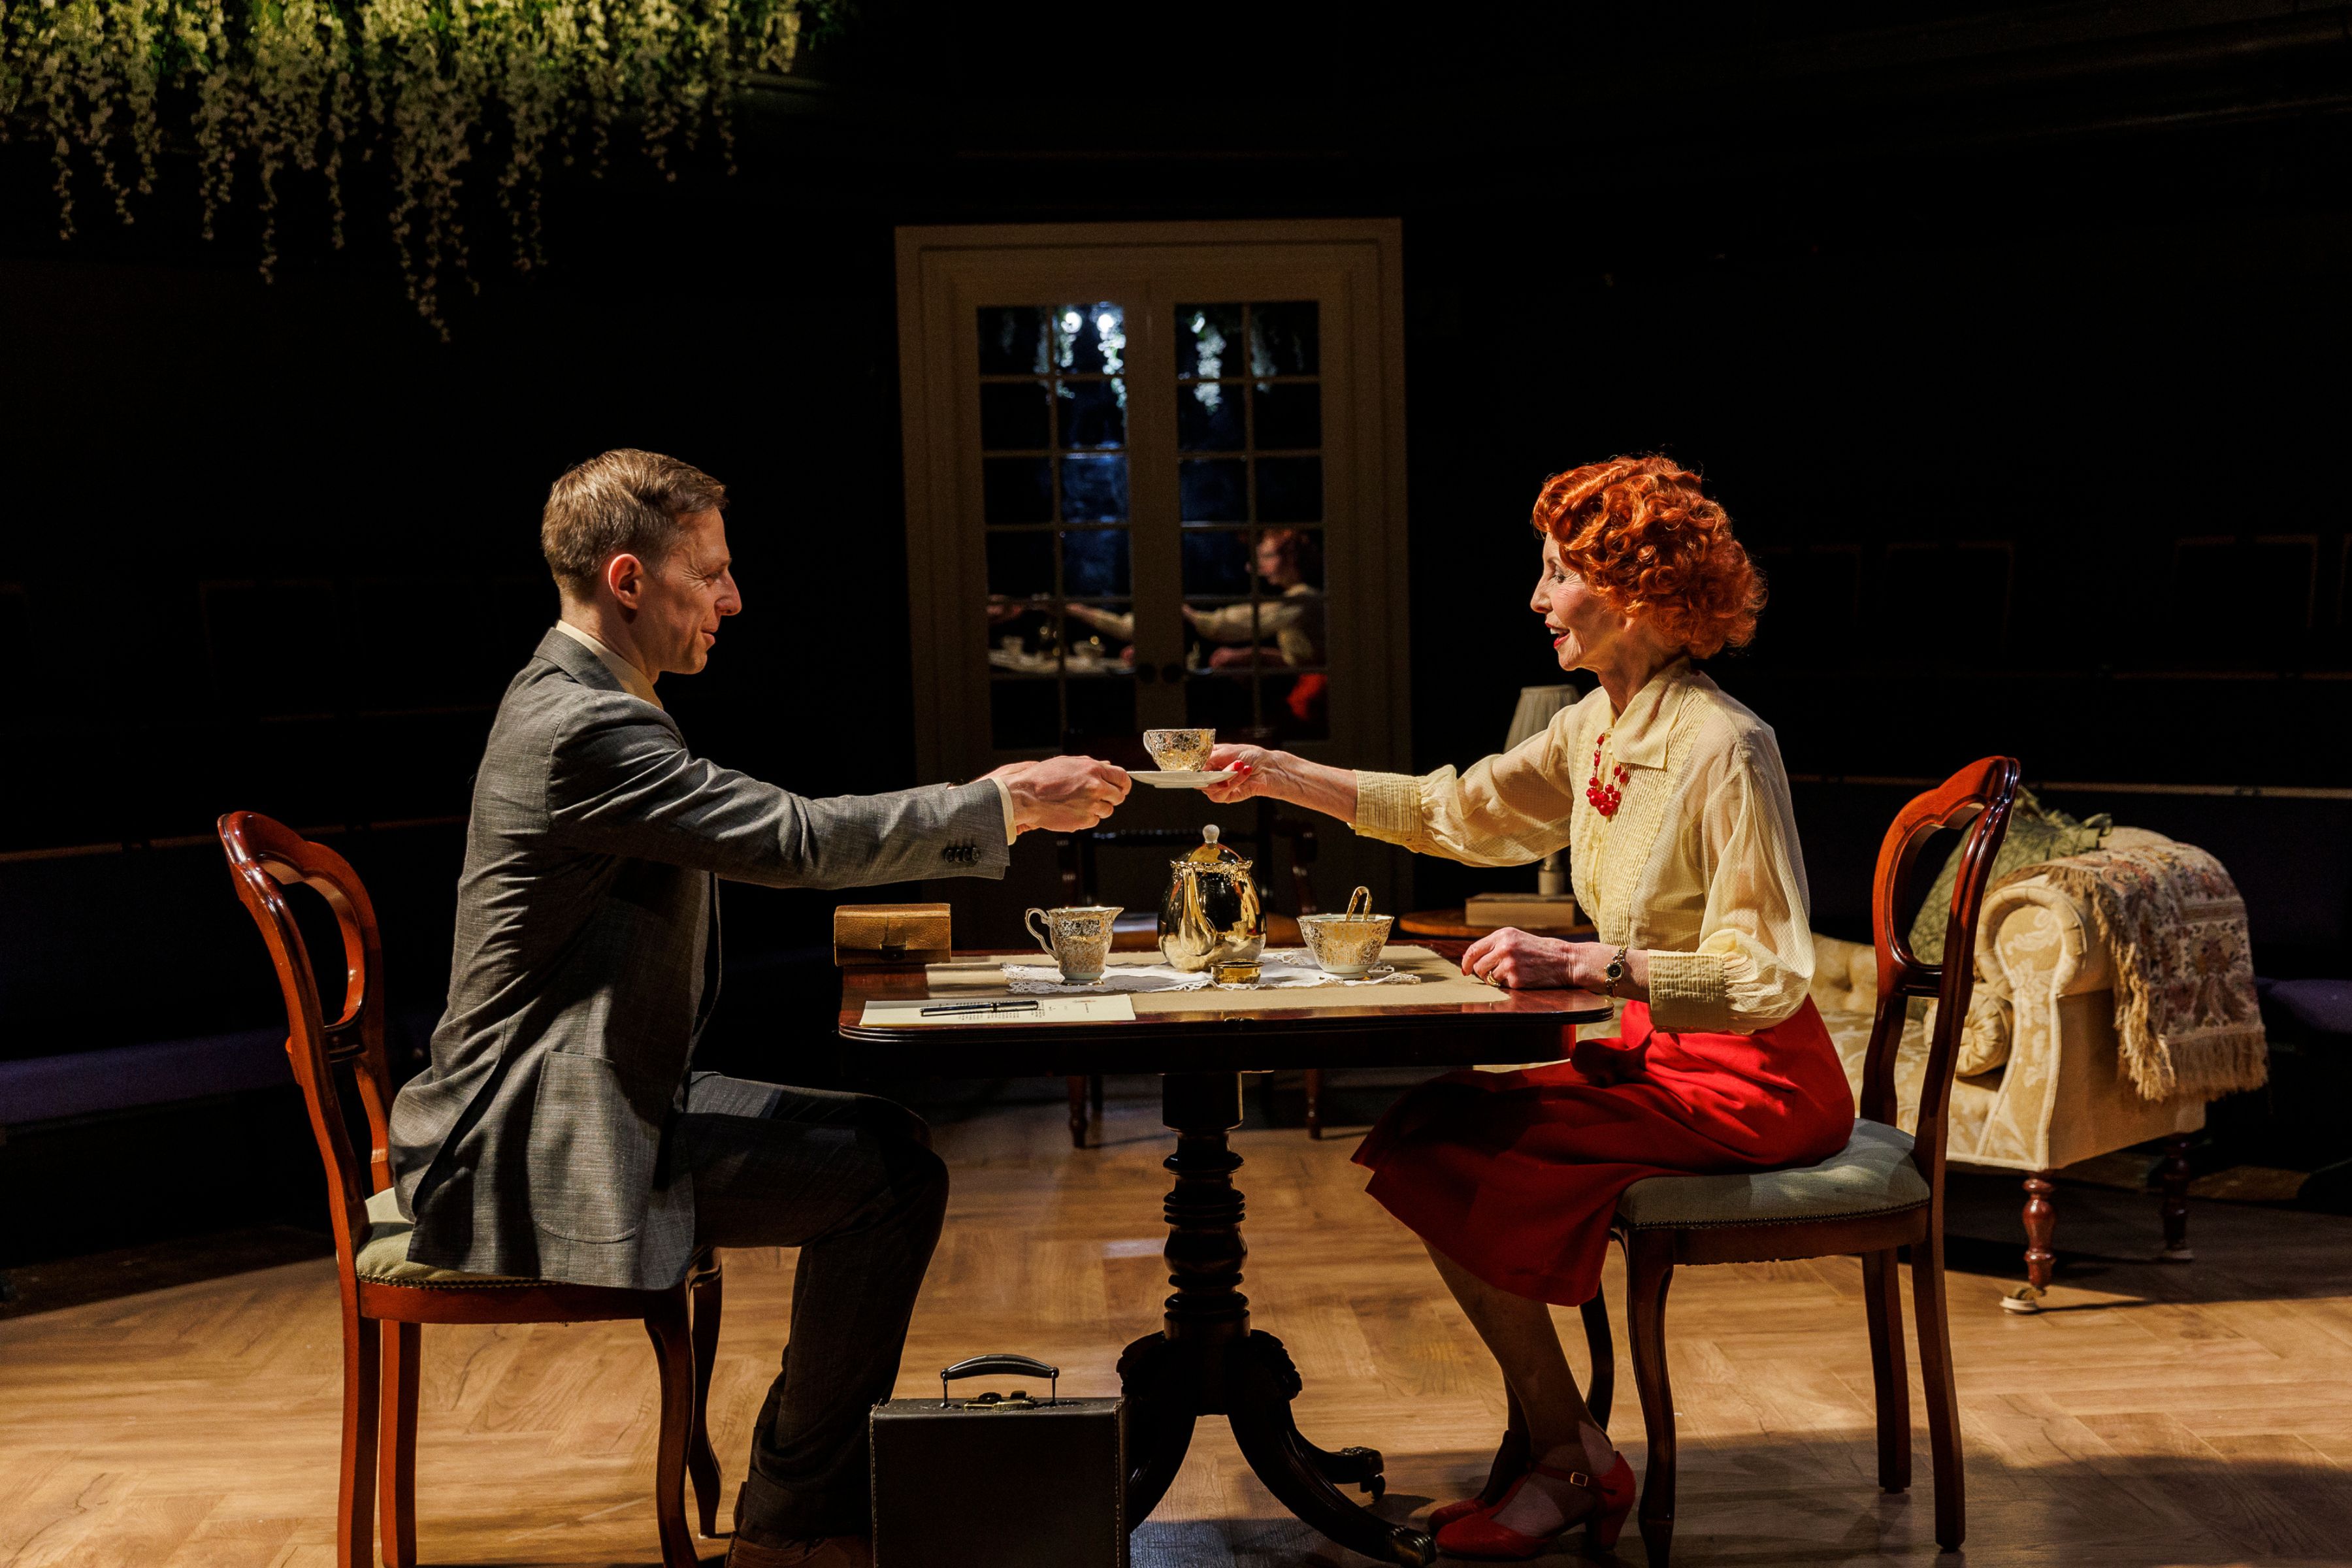 A man and woman are sat across from each other at a table. The man is wearing a grey suit and the woman is wearing a white blouse and red skirt. The woman is passing the man a teacup over the table.